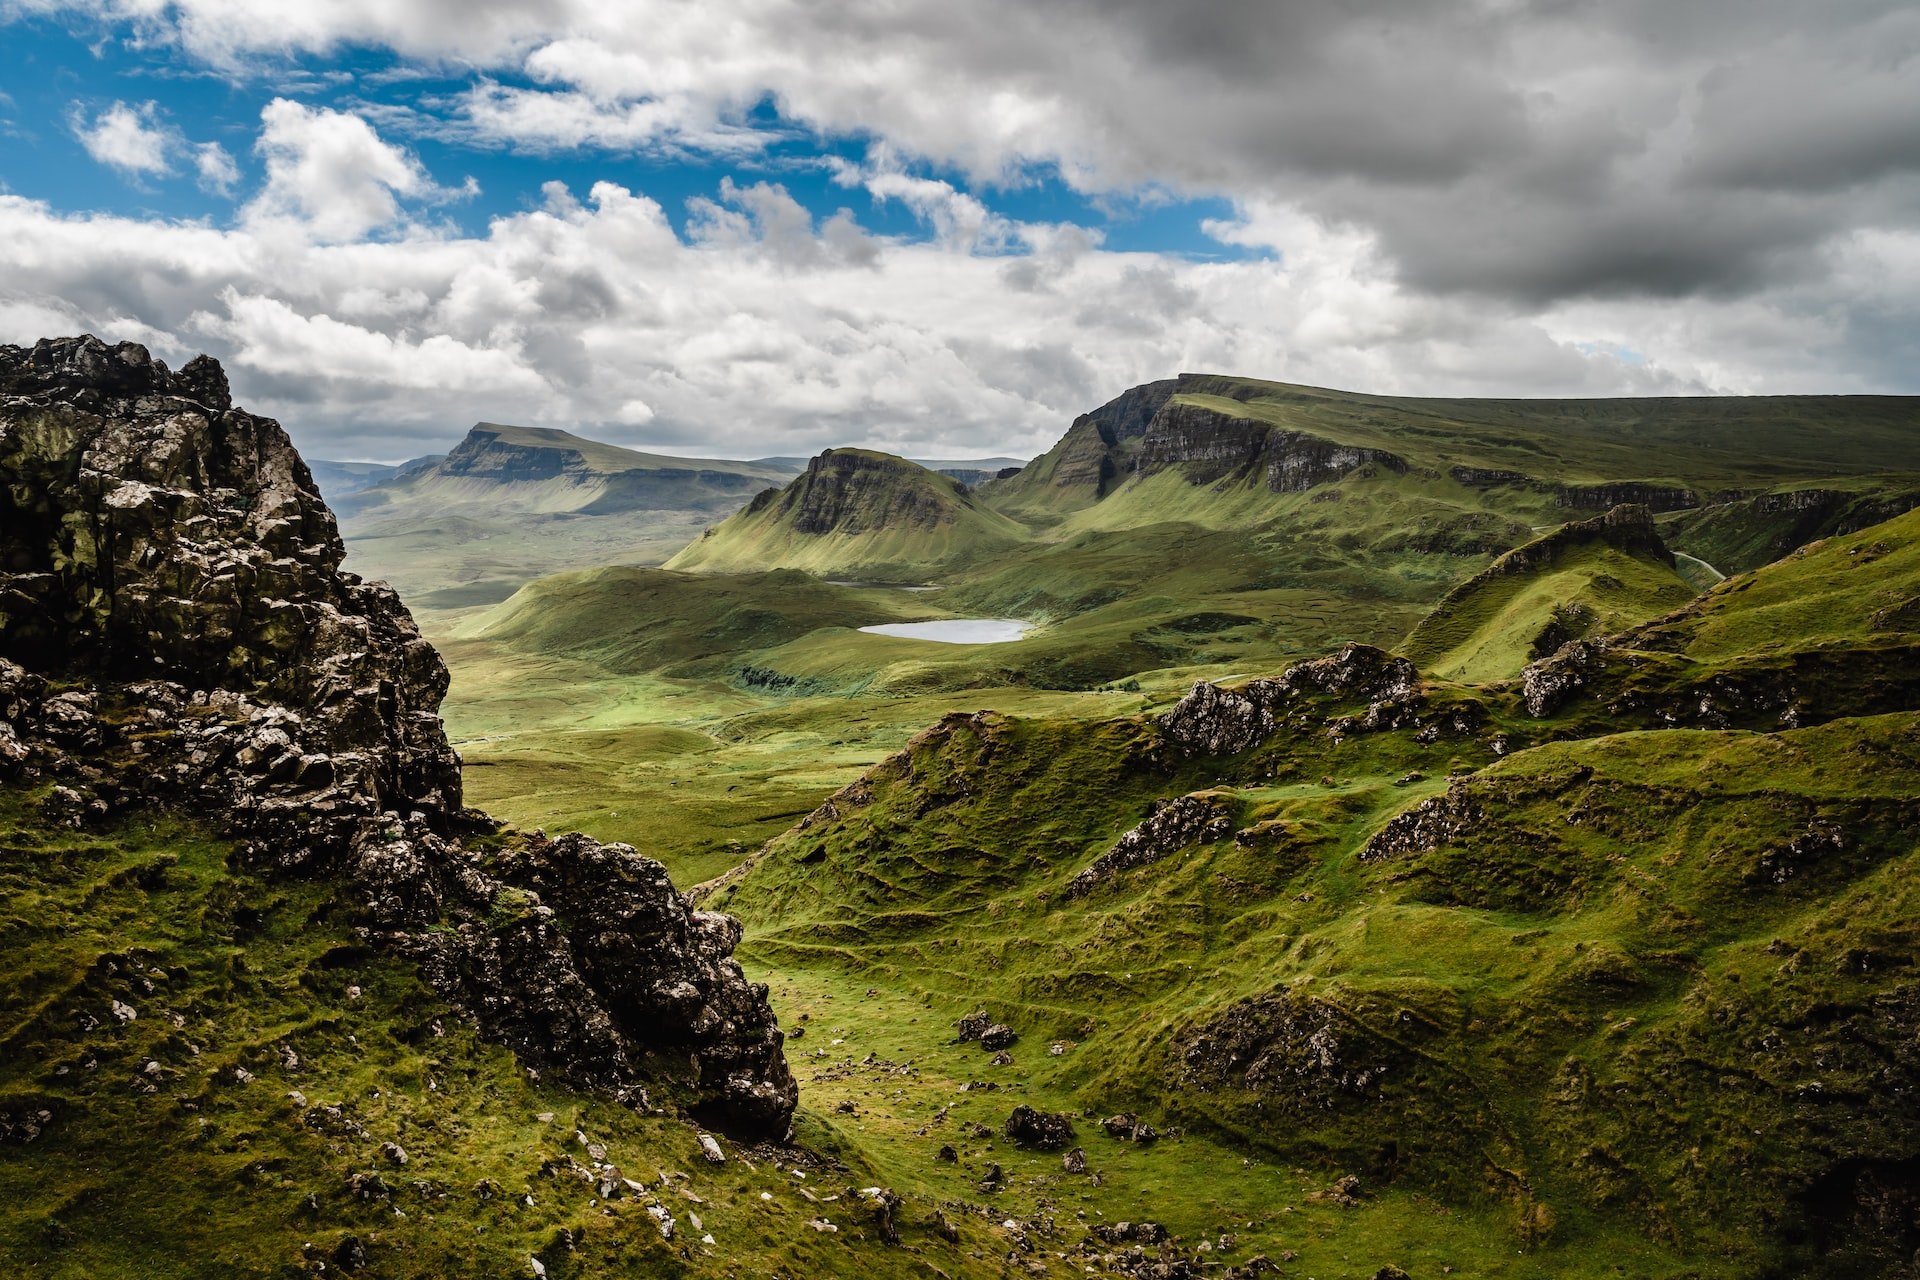 The magnificent landscape found along the Isle of Skye.